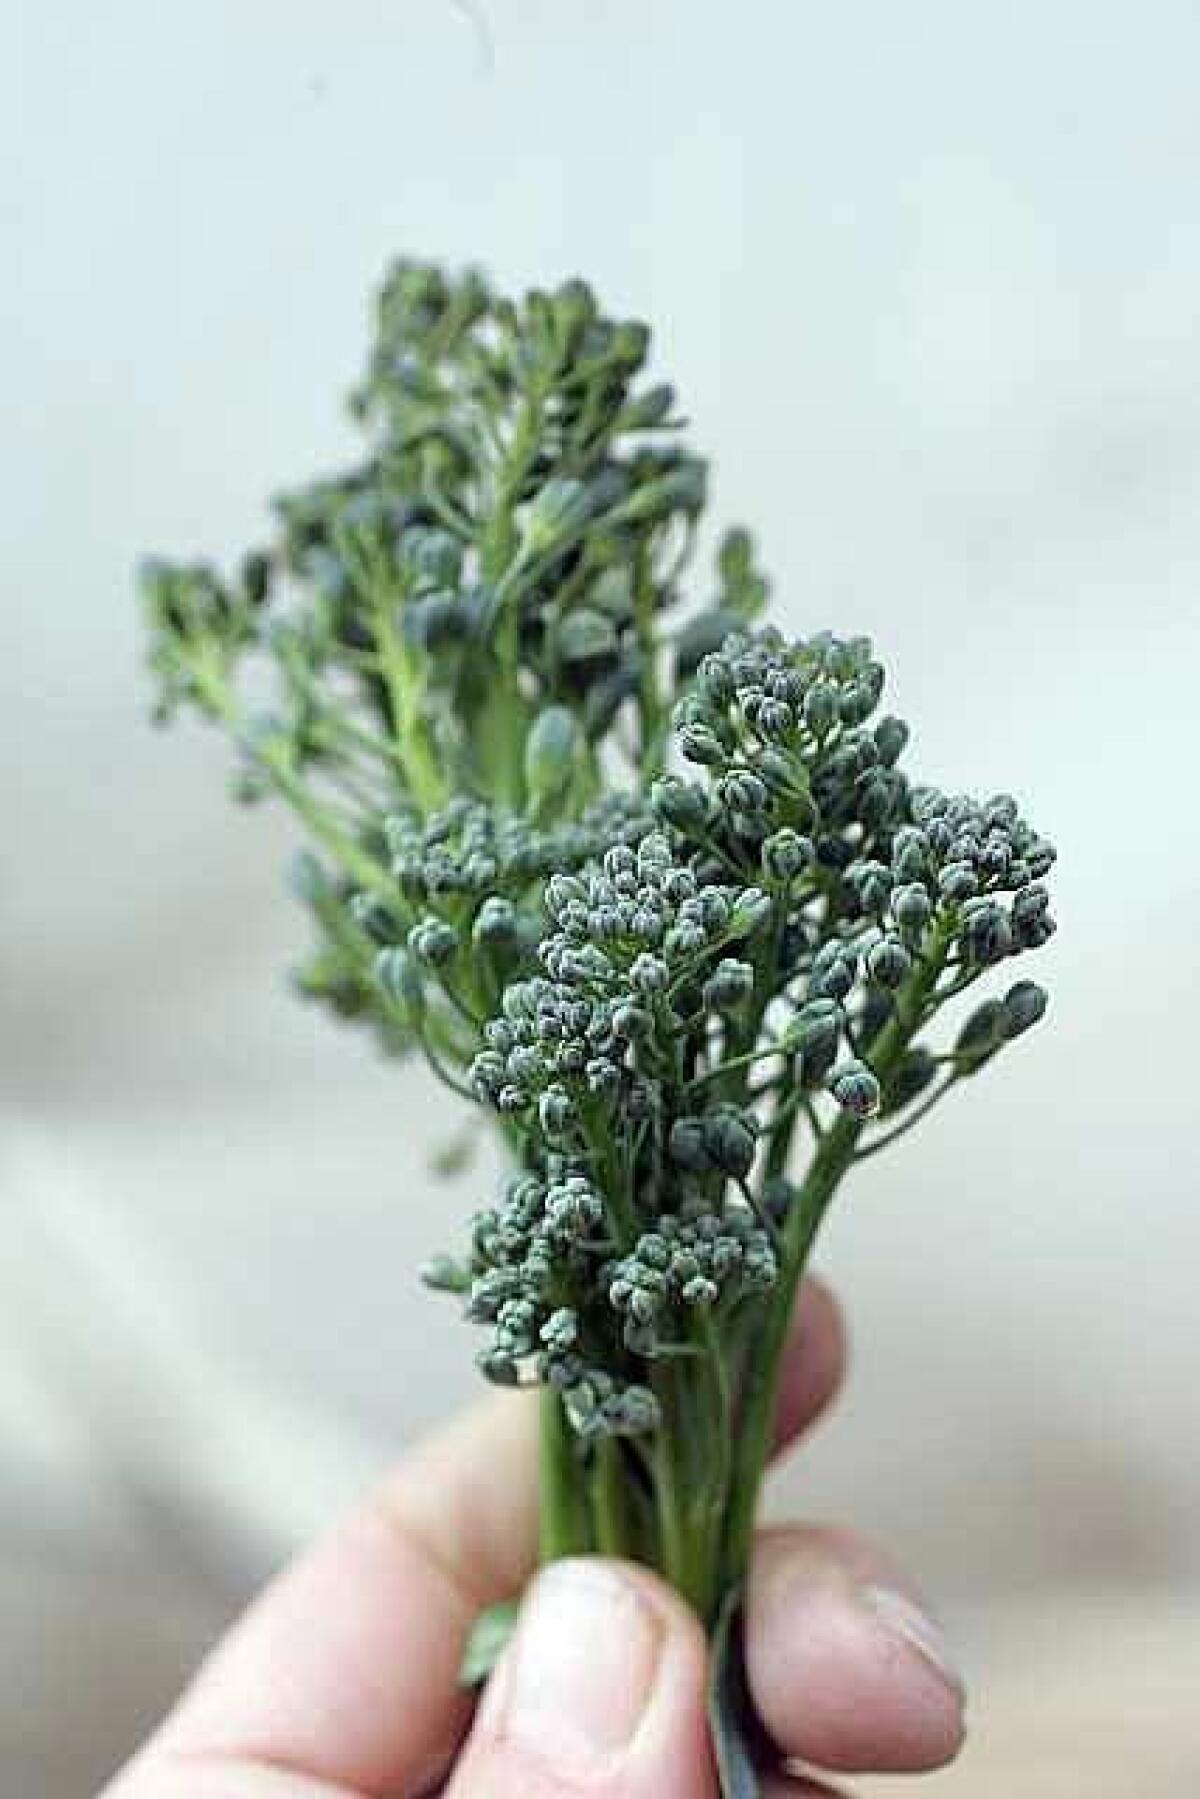 The flavor of "baby broccoli" is concentrated more in its leggy stems than in its flowering heads.